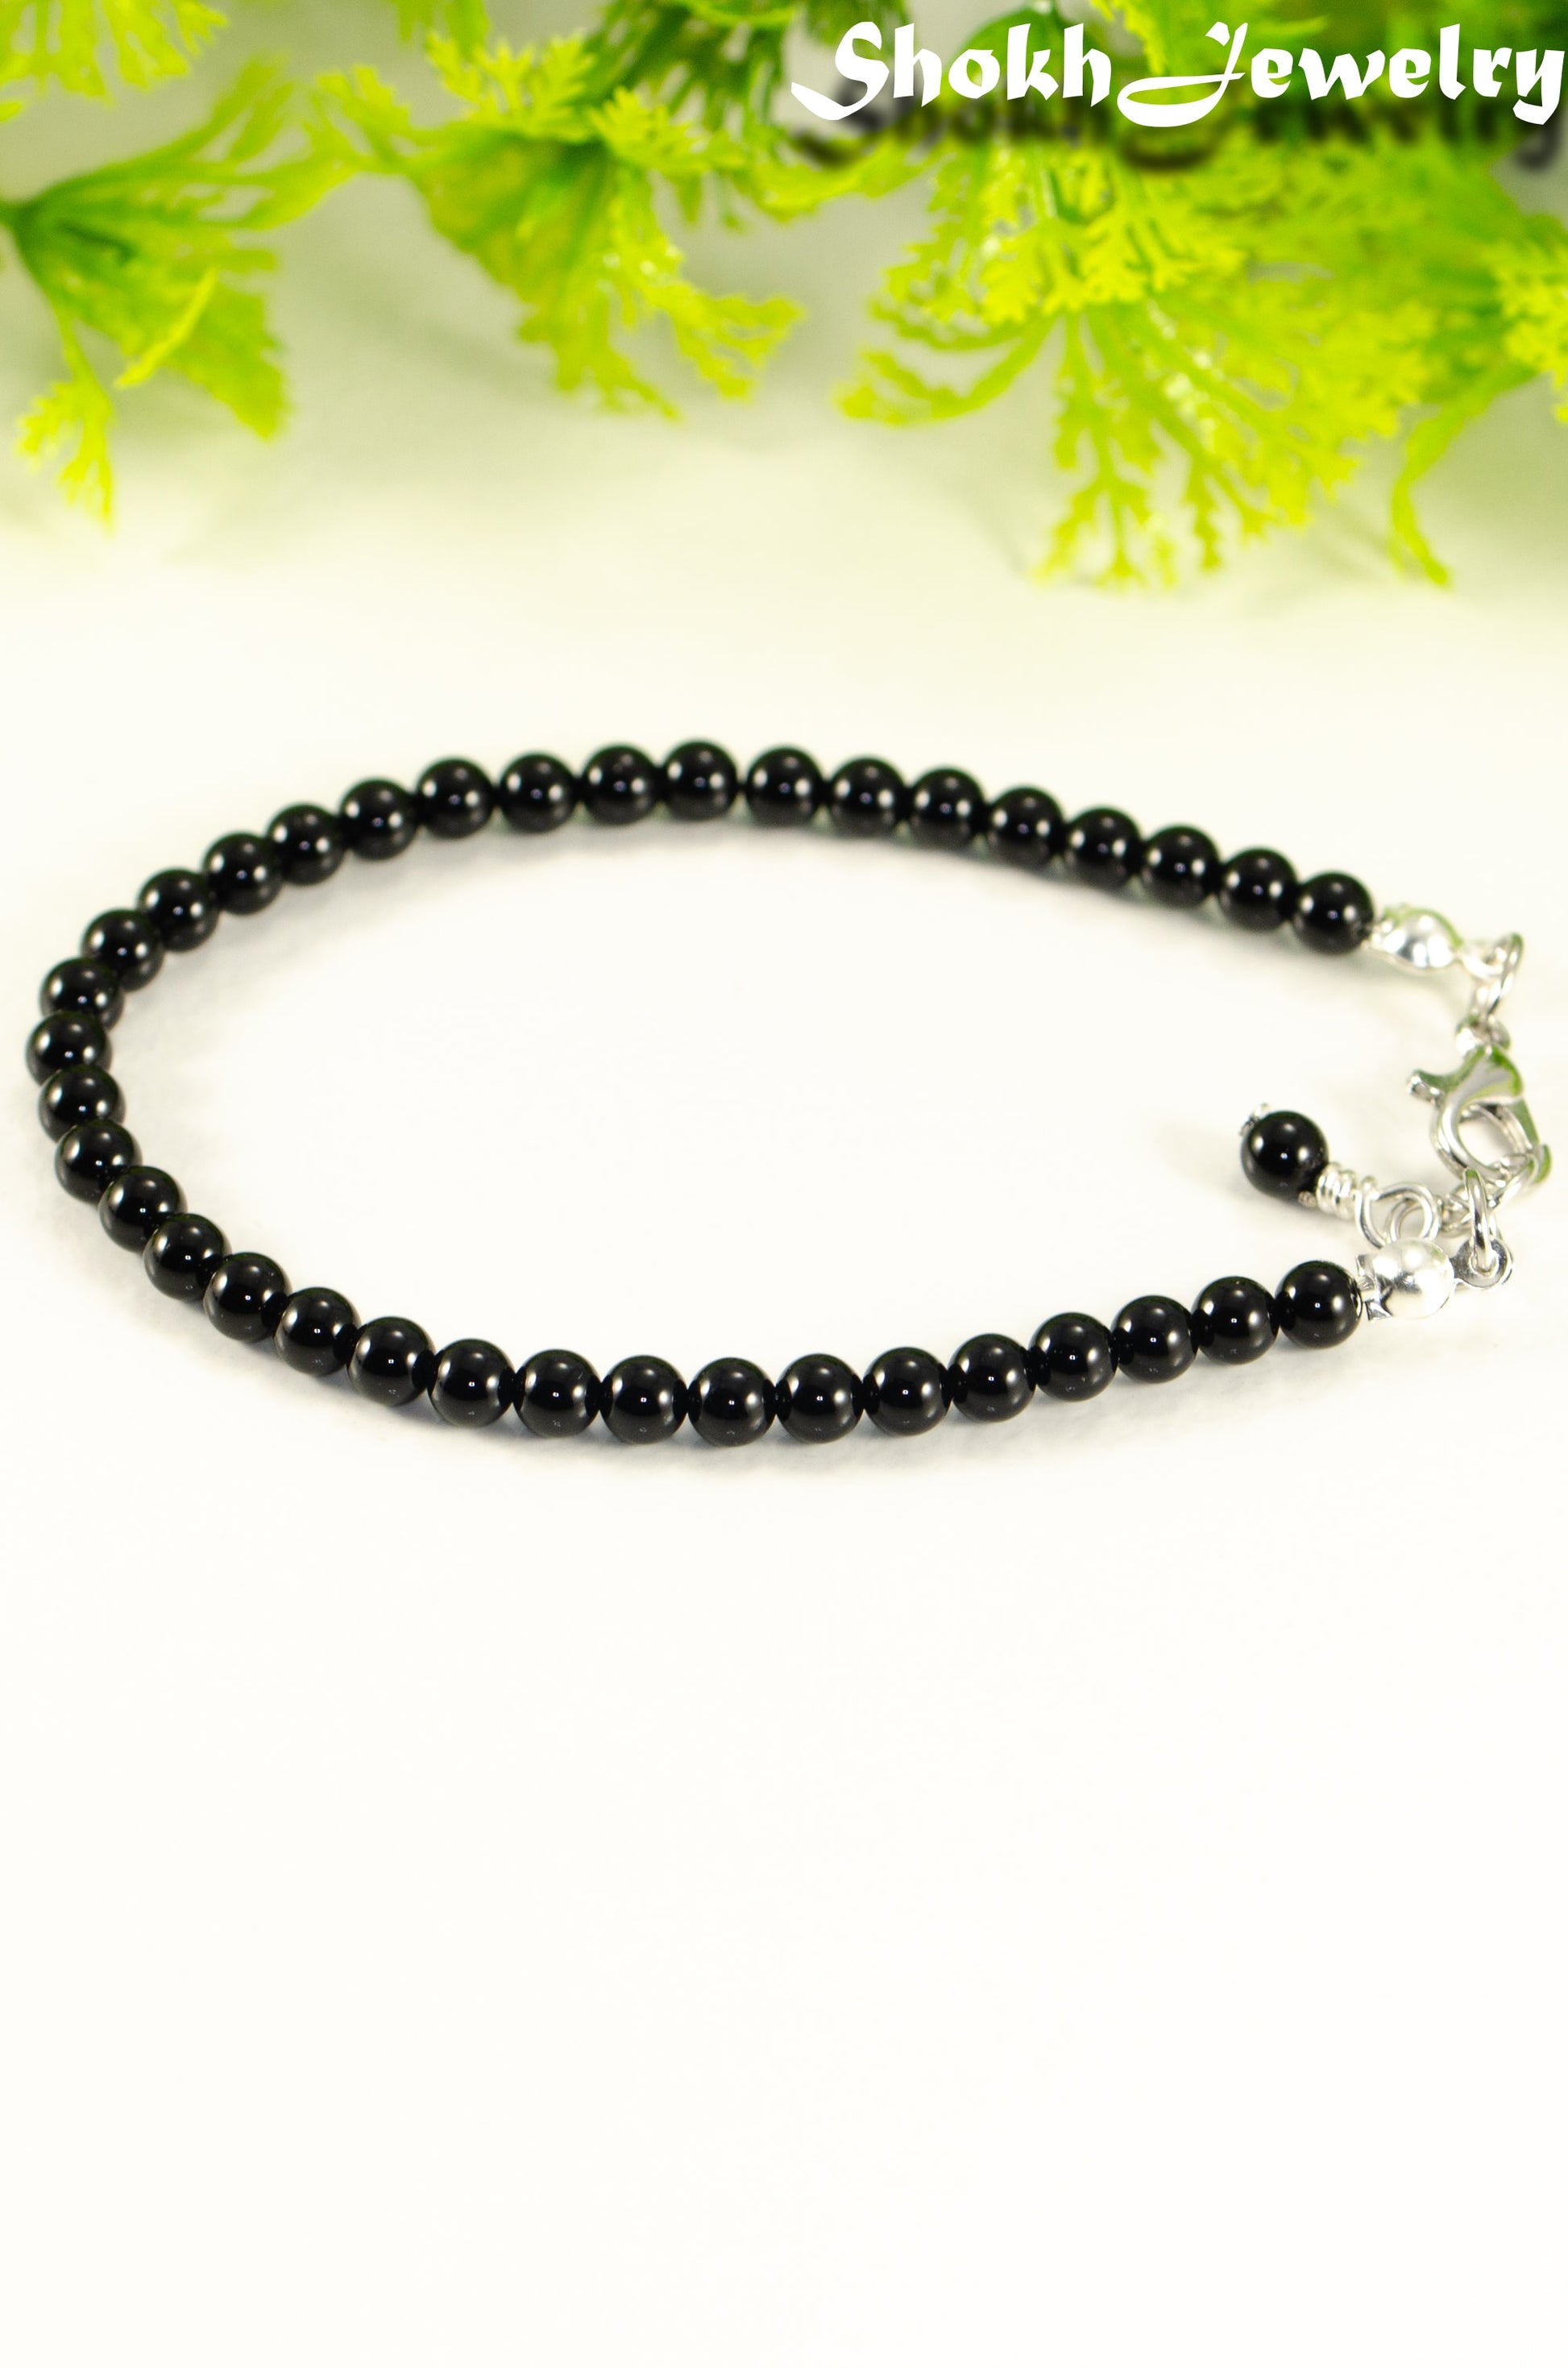 Close up of 4mm Black Obsidian Crystal Bracelet with Clasp.